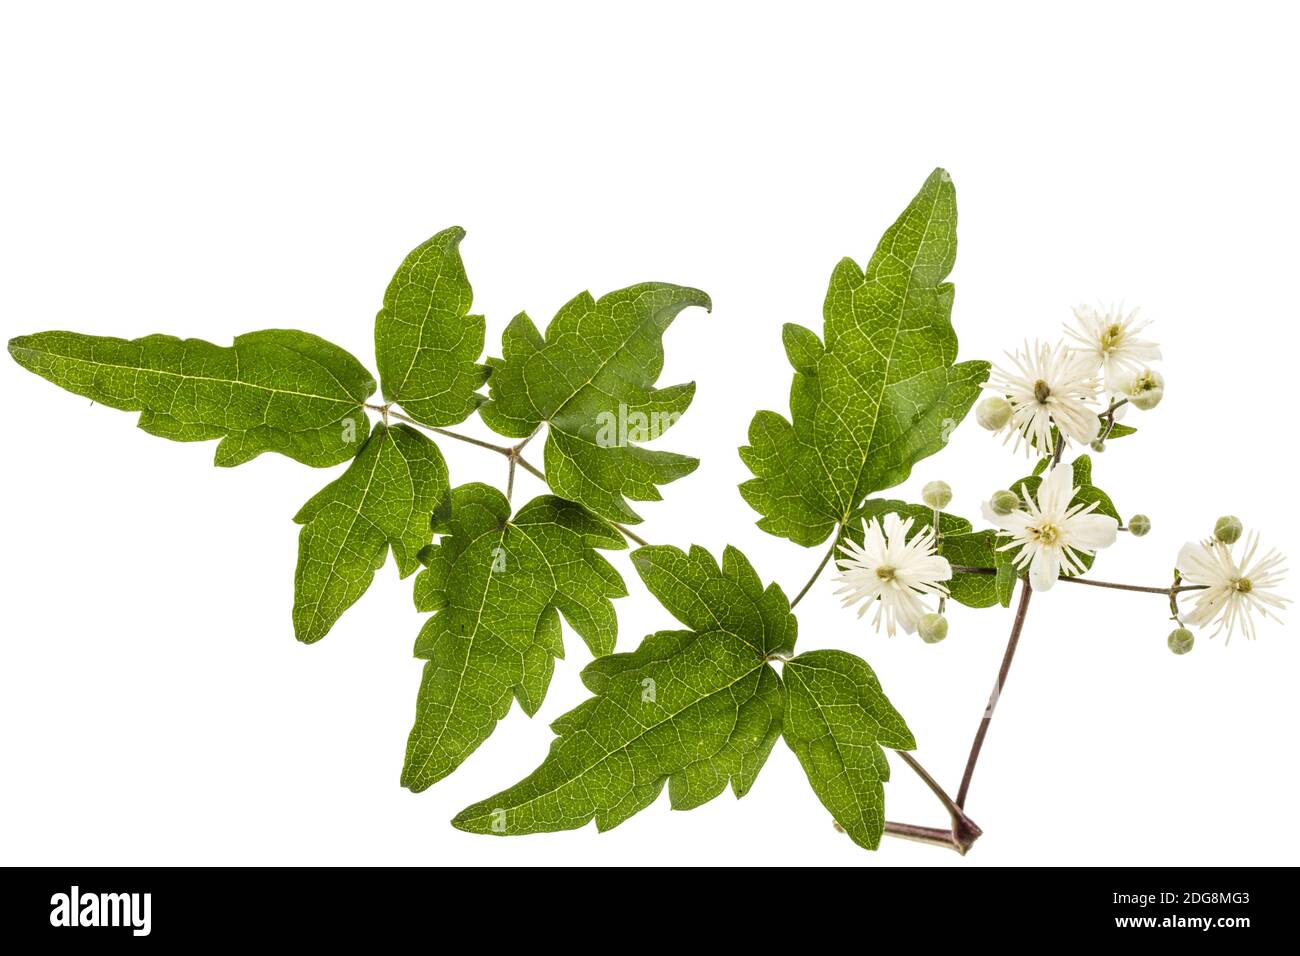 Flowers and leafs of Clematis , lat. Clematis vitalba L., isolated on white background Stock Photo